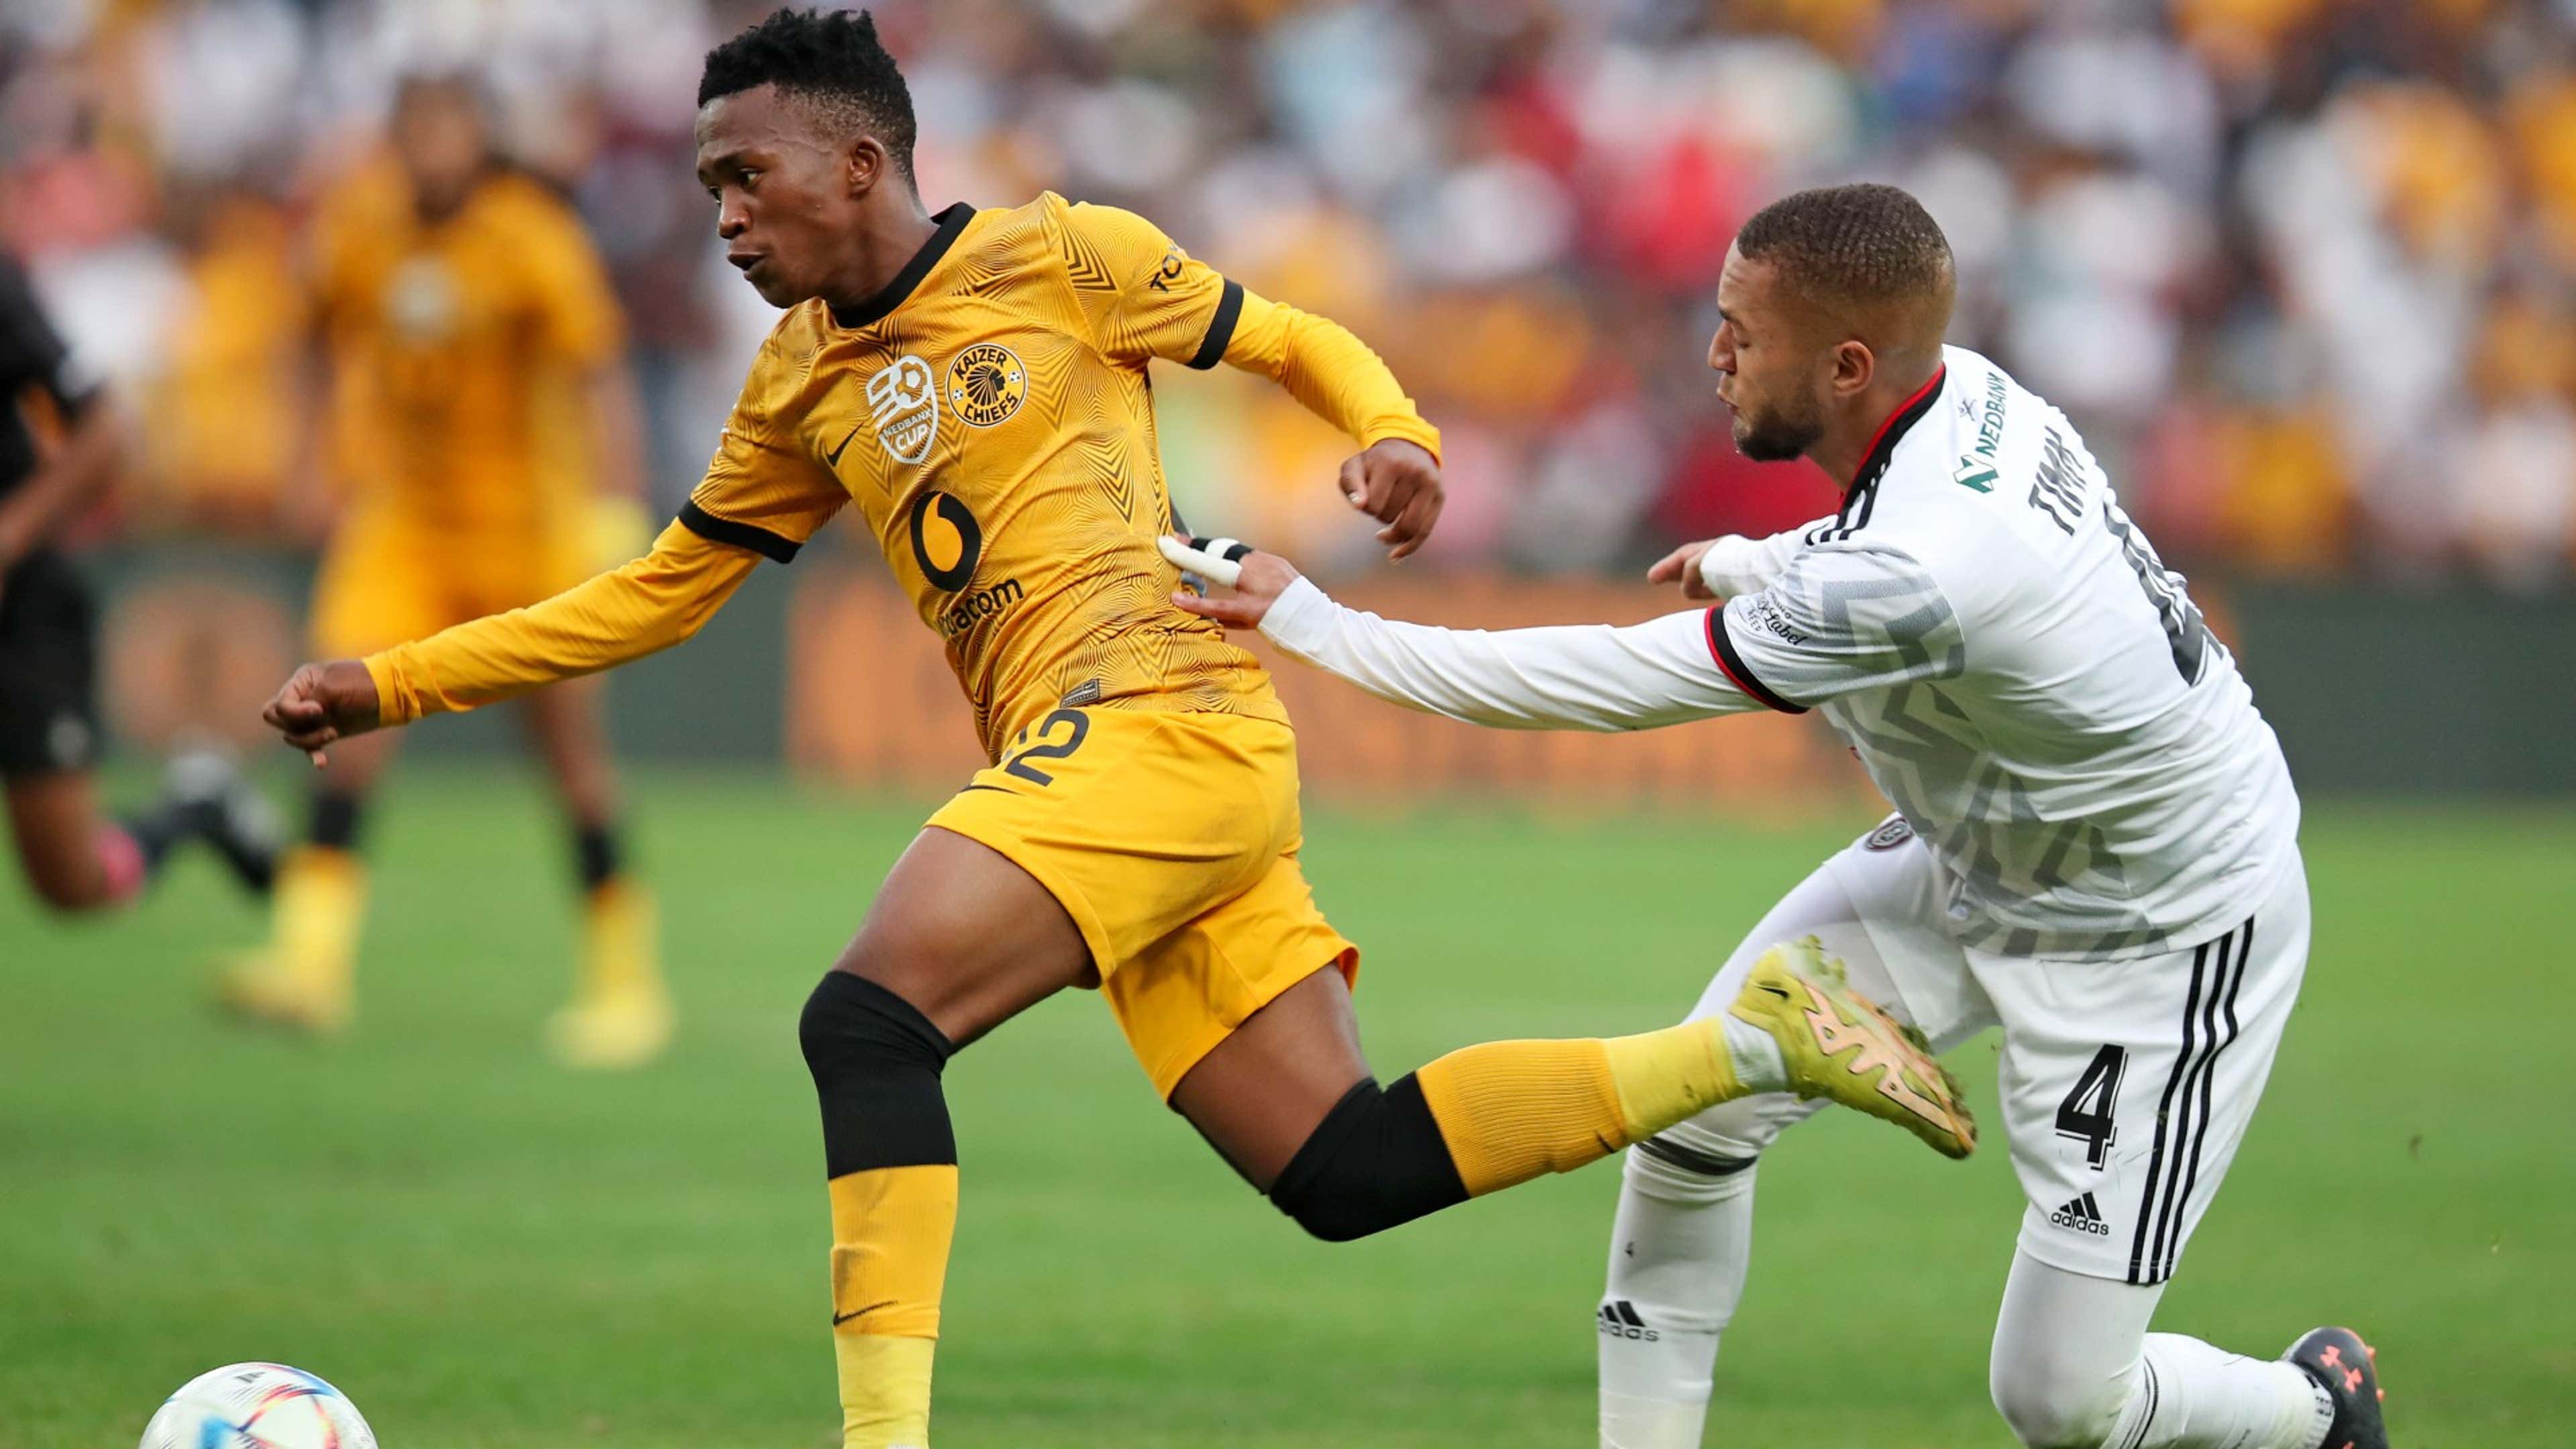 Orlando Pirates and Kaizer Chiefs ready to butt heads once more